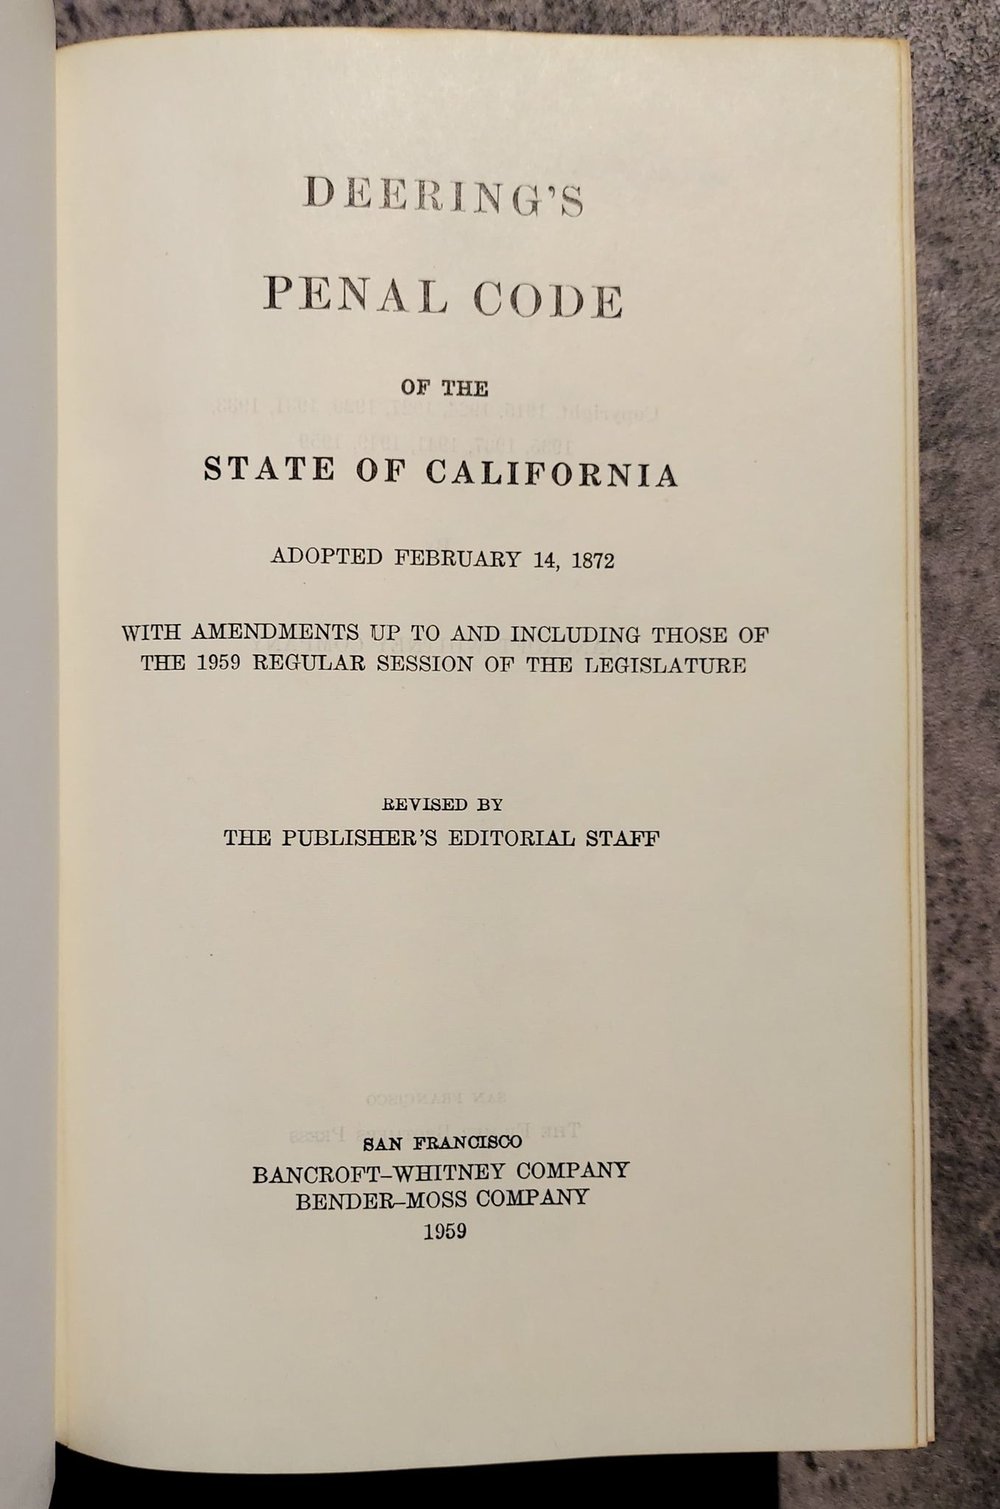 Deering’s Penal Code of the State of California - 1959